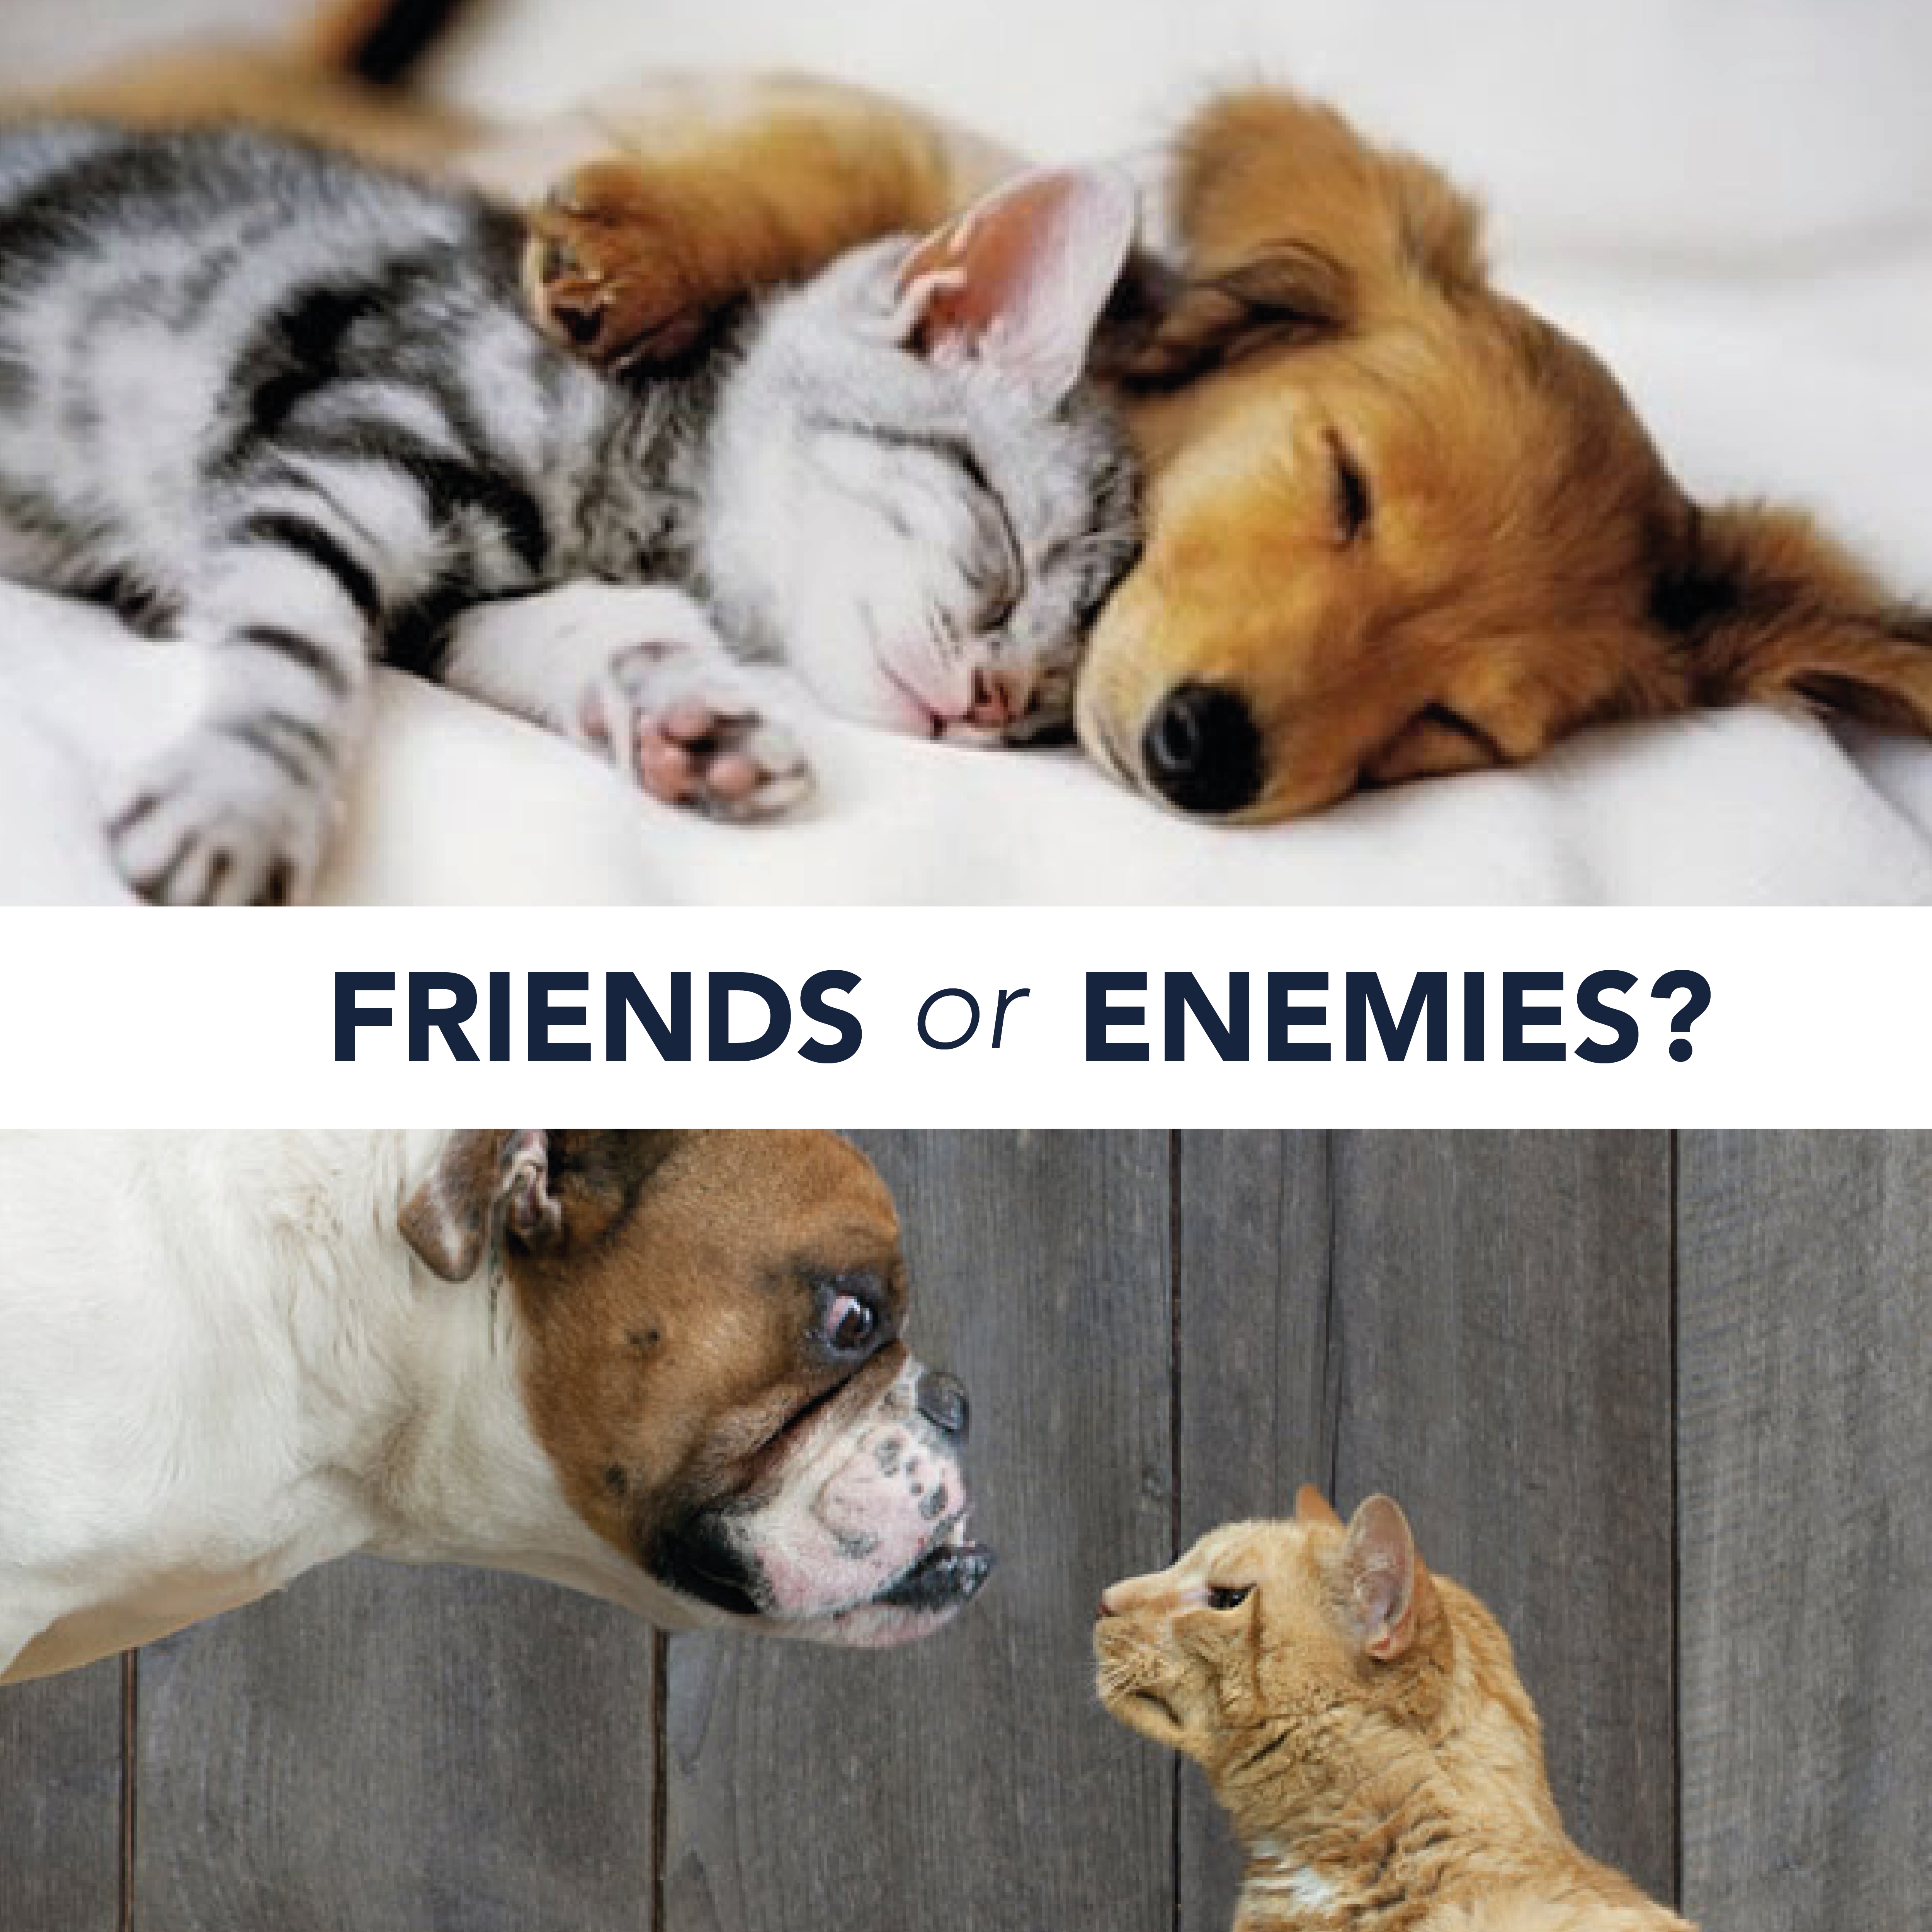 Can cats and dogs be friends?